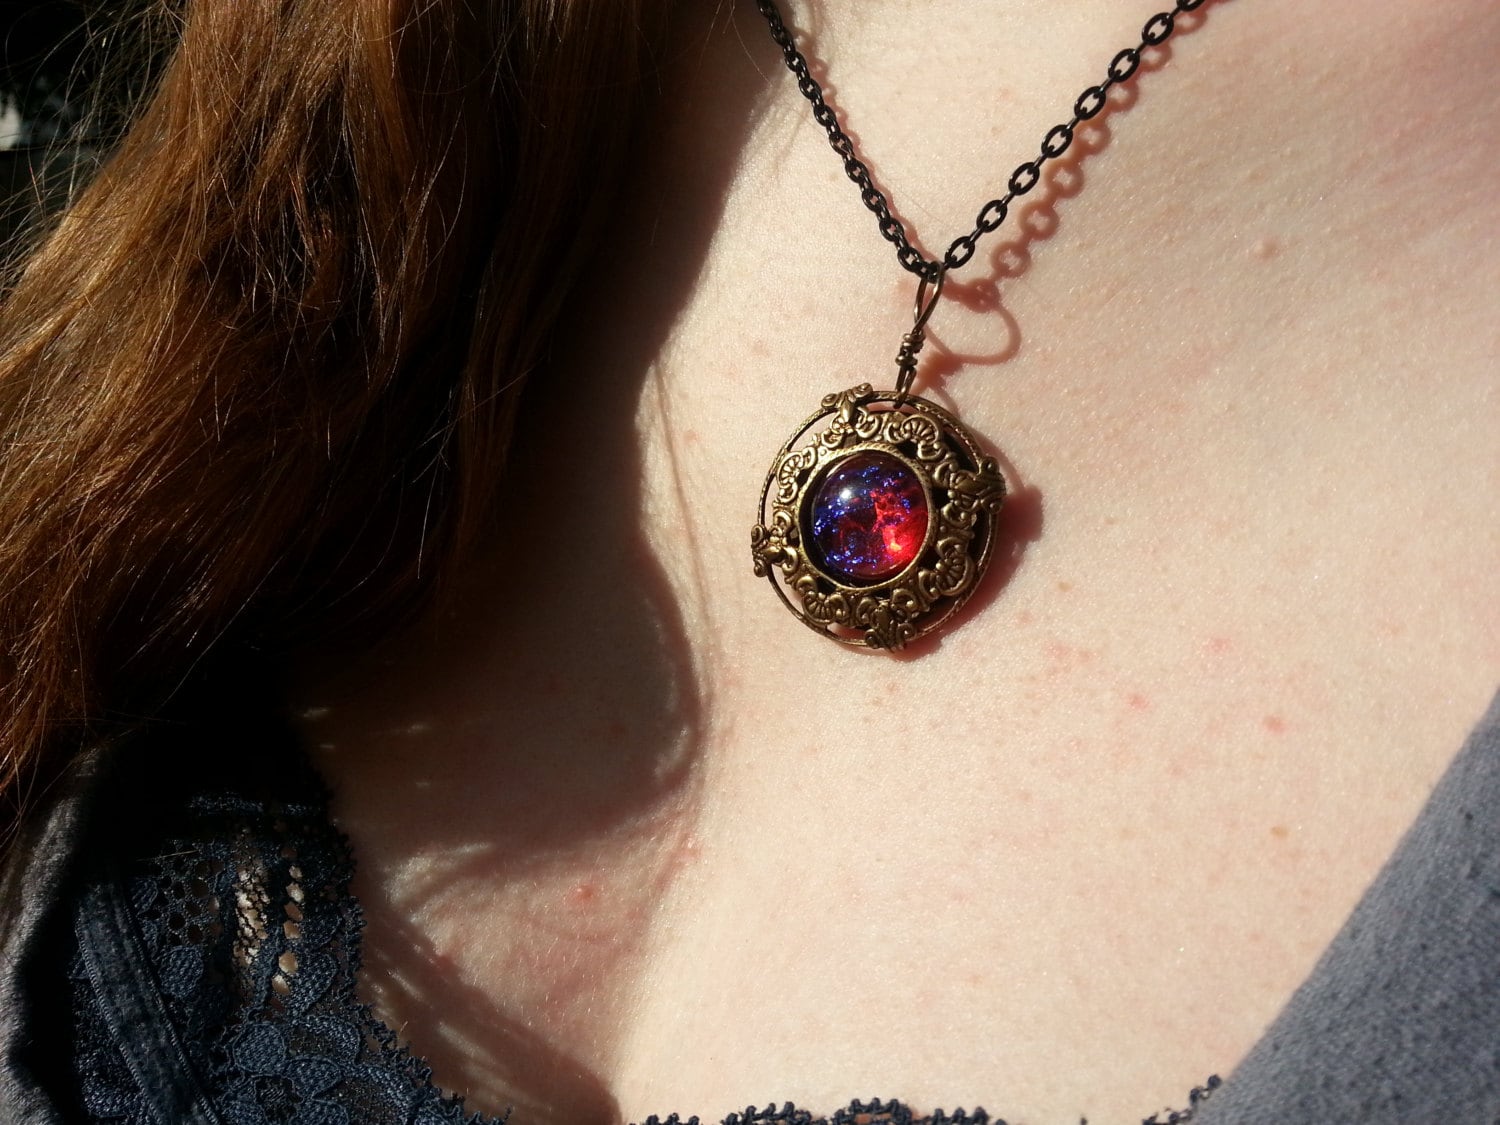 Fire Opal Necklace, Dragon's Breath Necklace, Filigree Necklace, Opal Necklace, Ren Faire, Game Con, Comic Con, Free Shipping, Summer  gifts